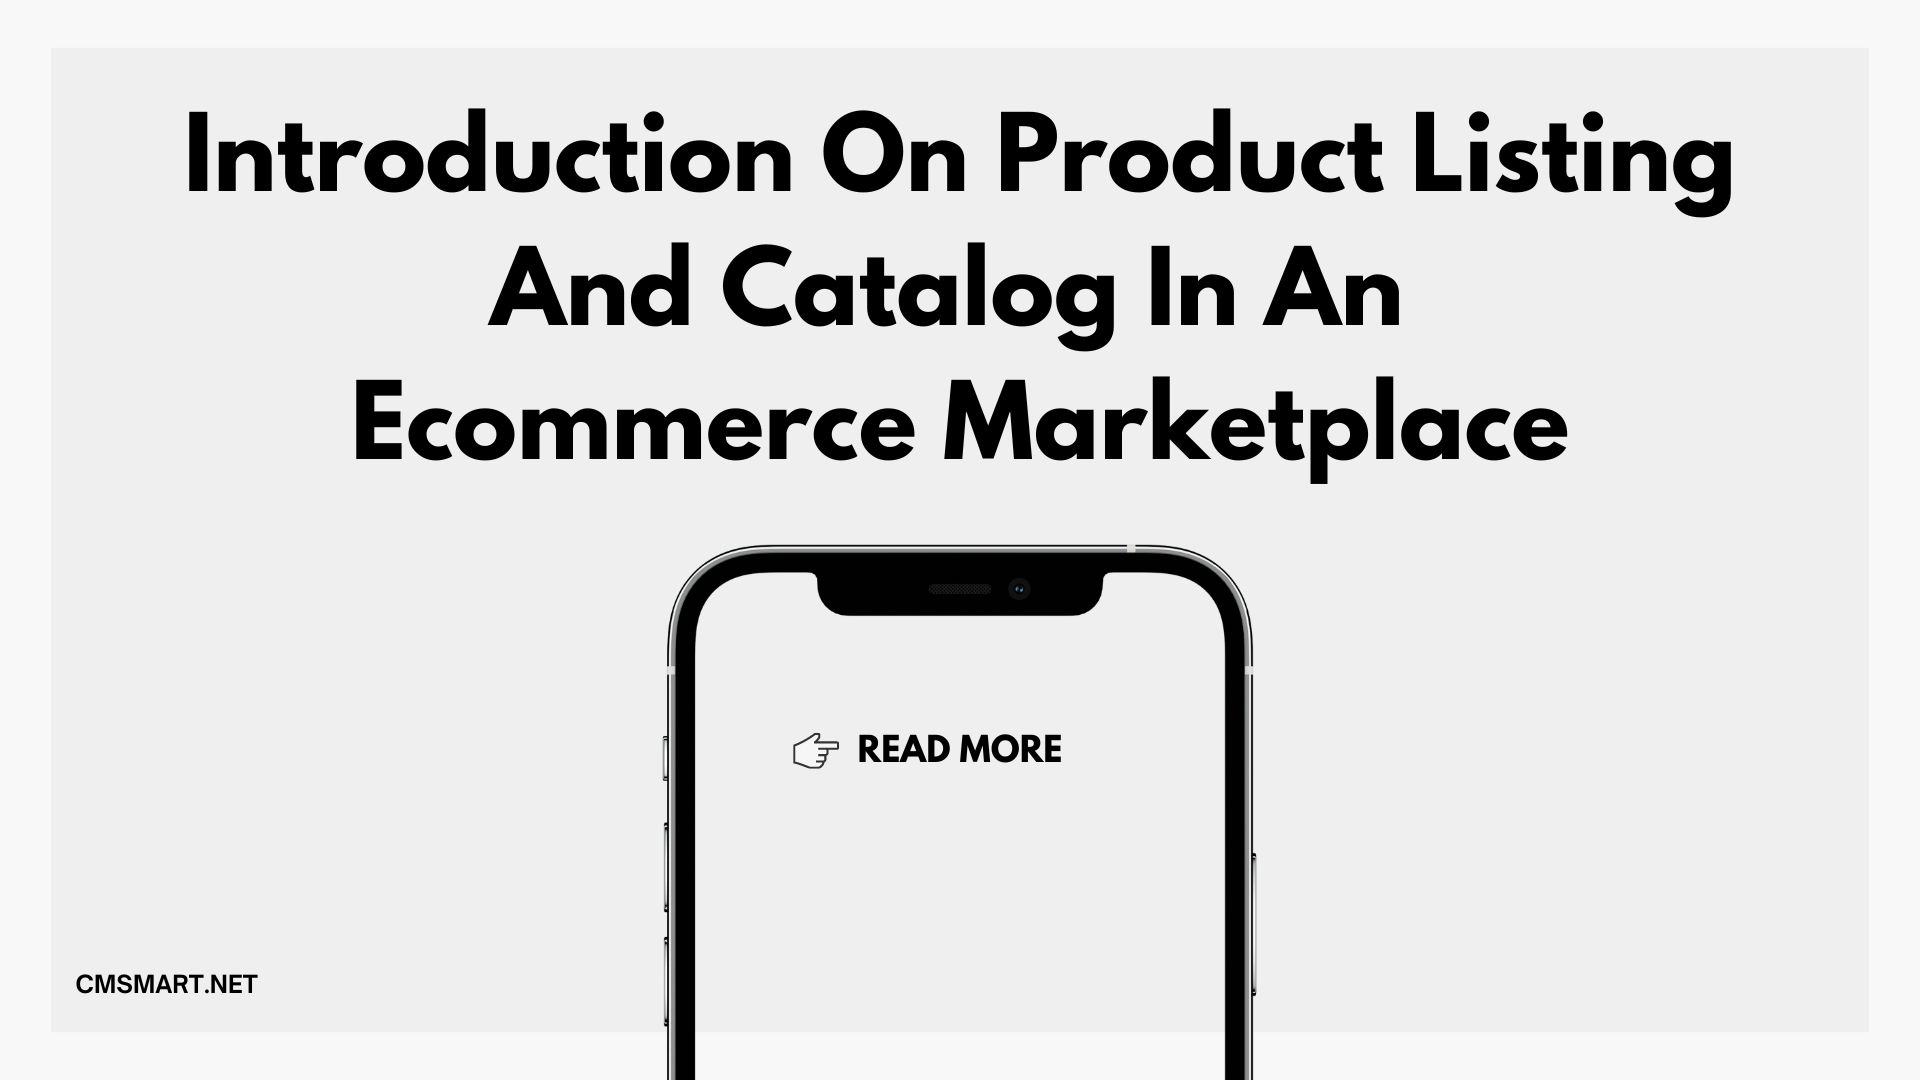 Introduction On Product Listing And Catalog In An Ecommerce Marketplace